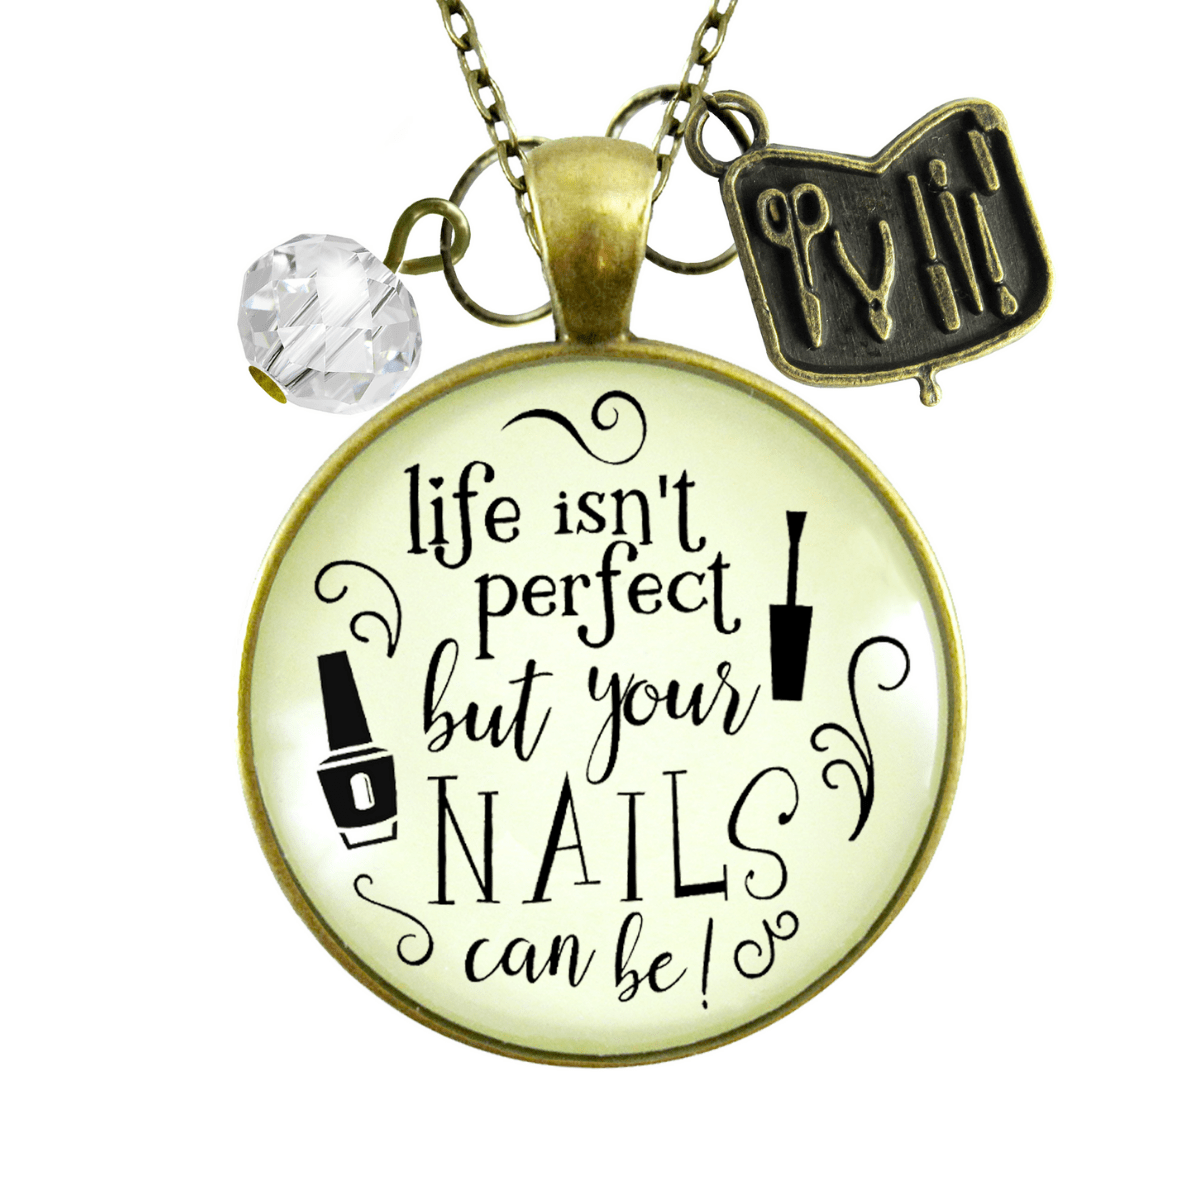 Gutsy Goodness Manicurist Gift Necklace Life Isn't Perfect Nails Beautician Jewelry Gift - Gutsy Goodness Handmade Jewelry;Manicurist Gift Necklace Life Isn't Perfect Nails Beautician Jewelry Gift - Gutsy Goodness Handmade Jewelry Gifts